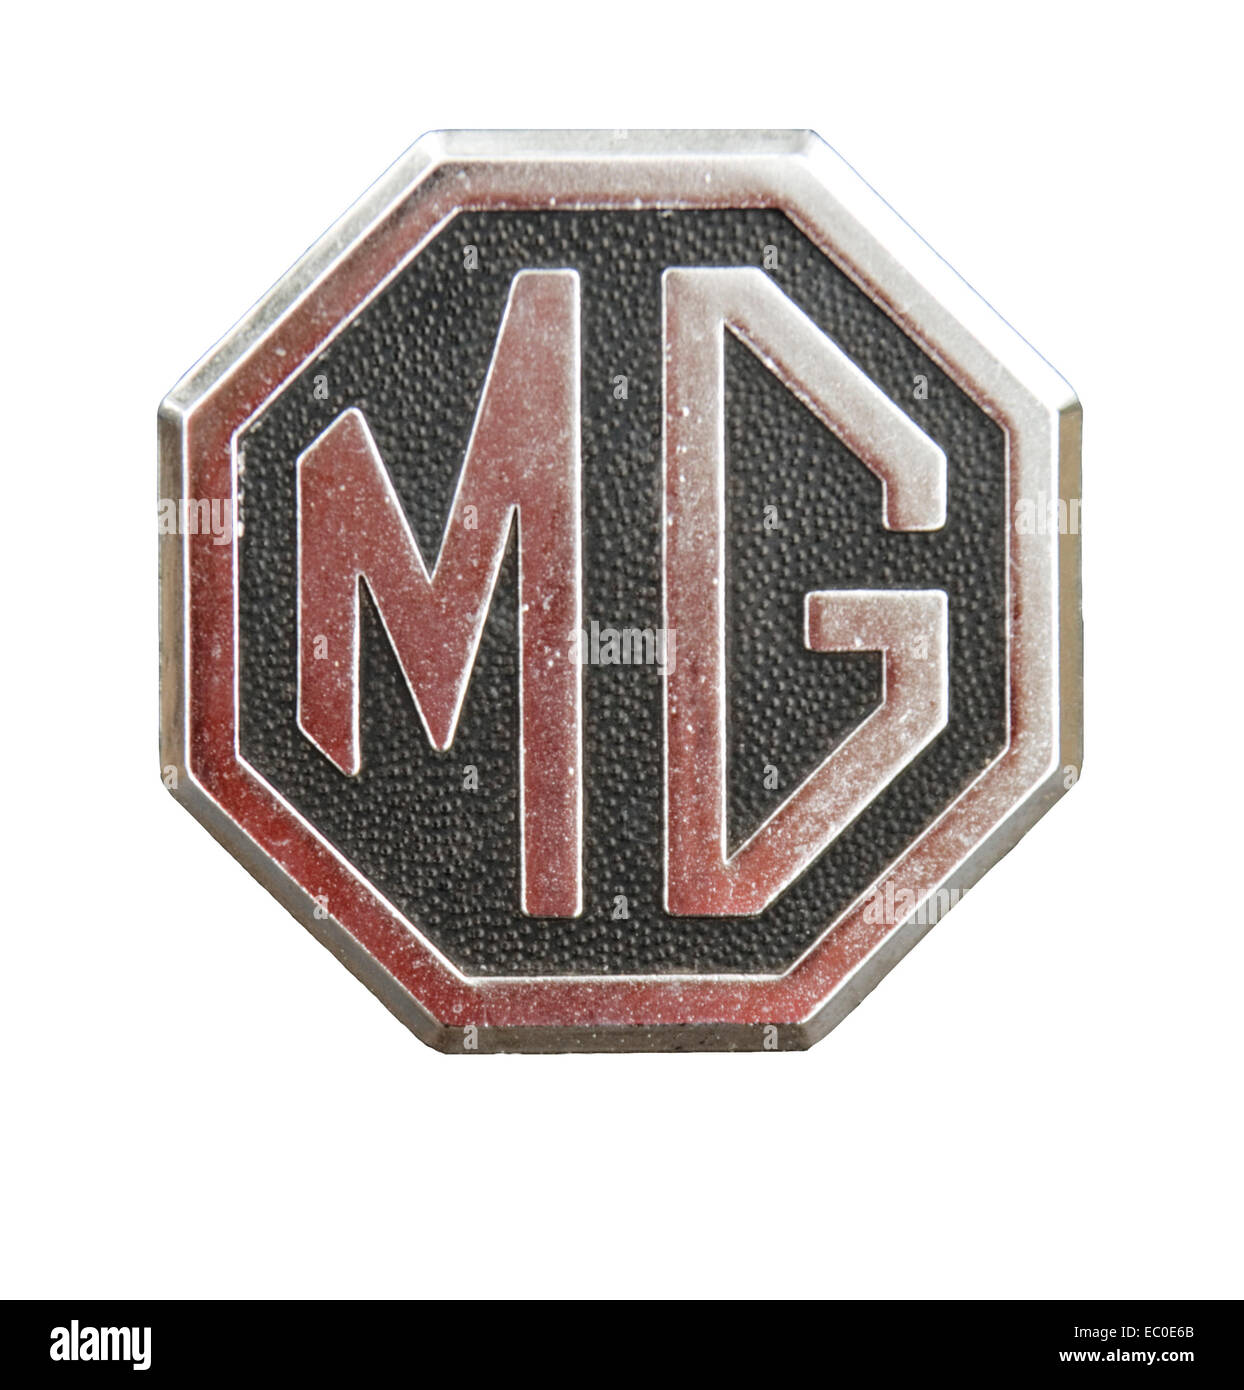 Octagonal metallic MG car emblem, large dark red letters on stippled black finish with red border, on plain white background Stock Photo